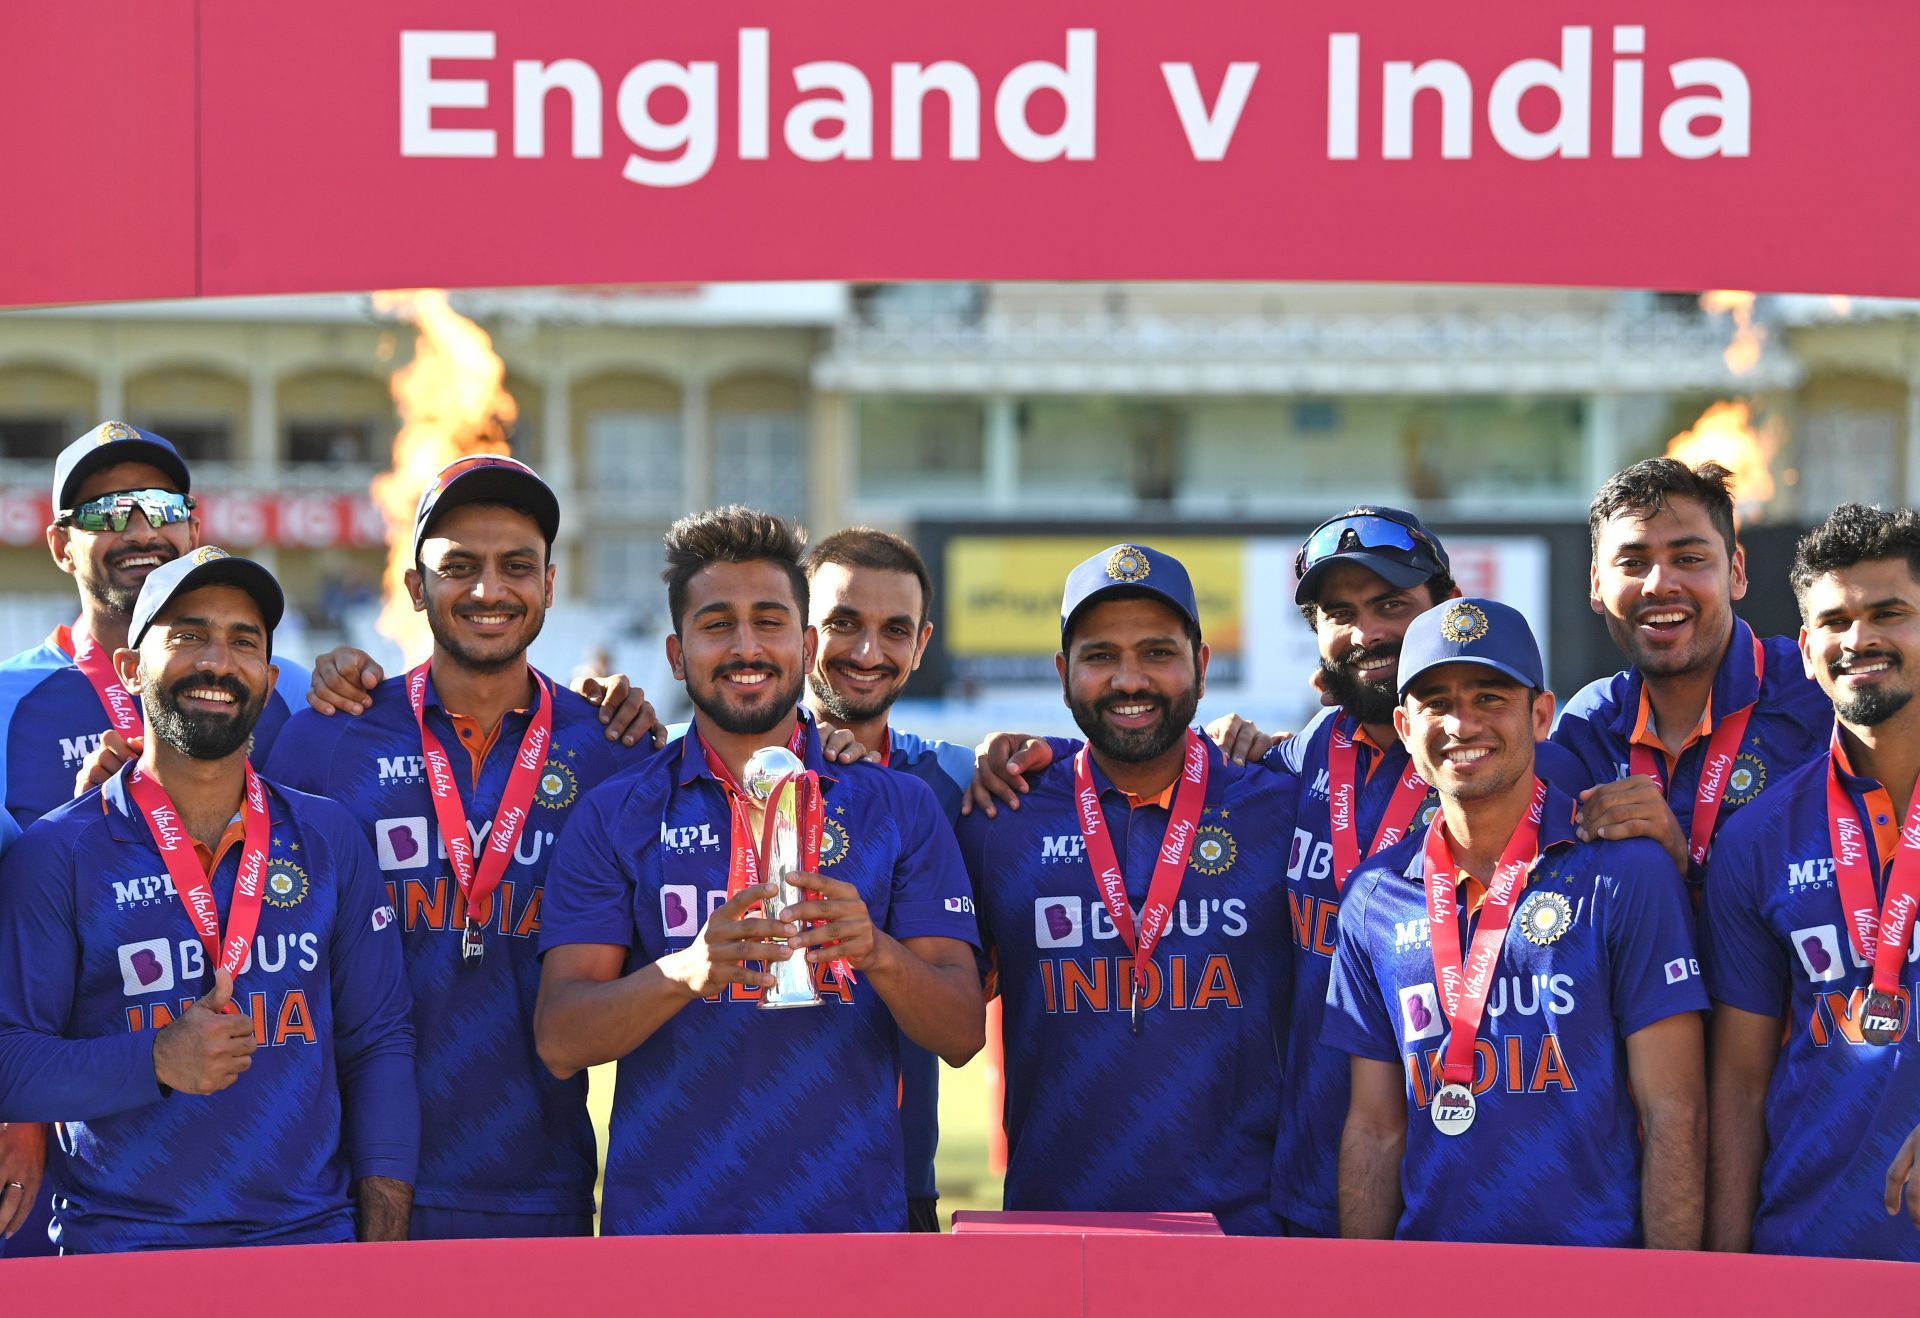 India continued their stellar run in the shortest format with a 2-1 series win over England.